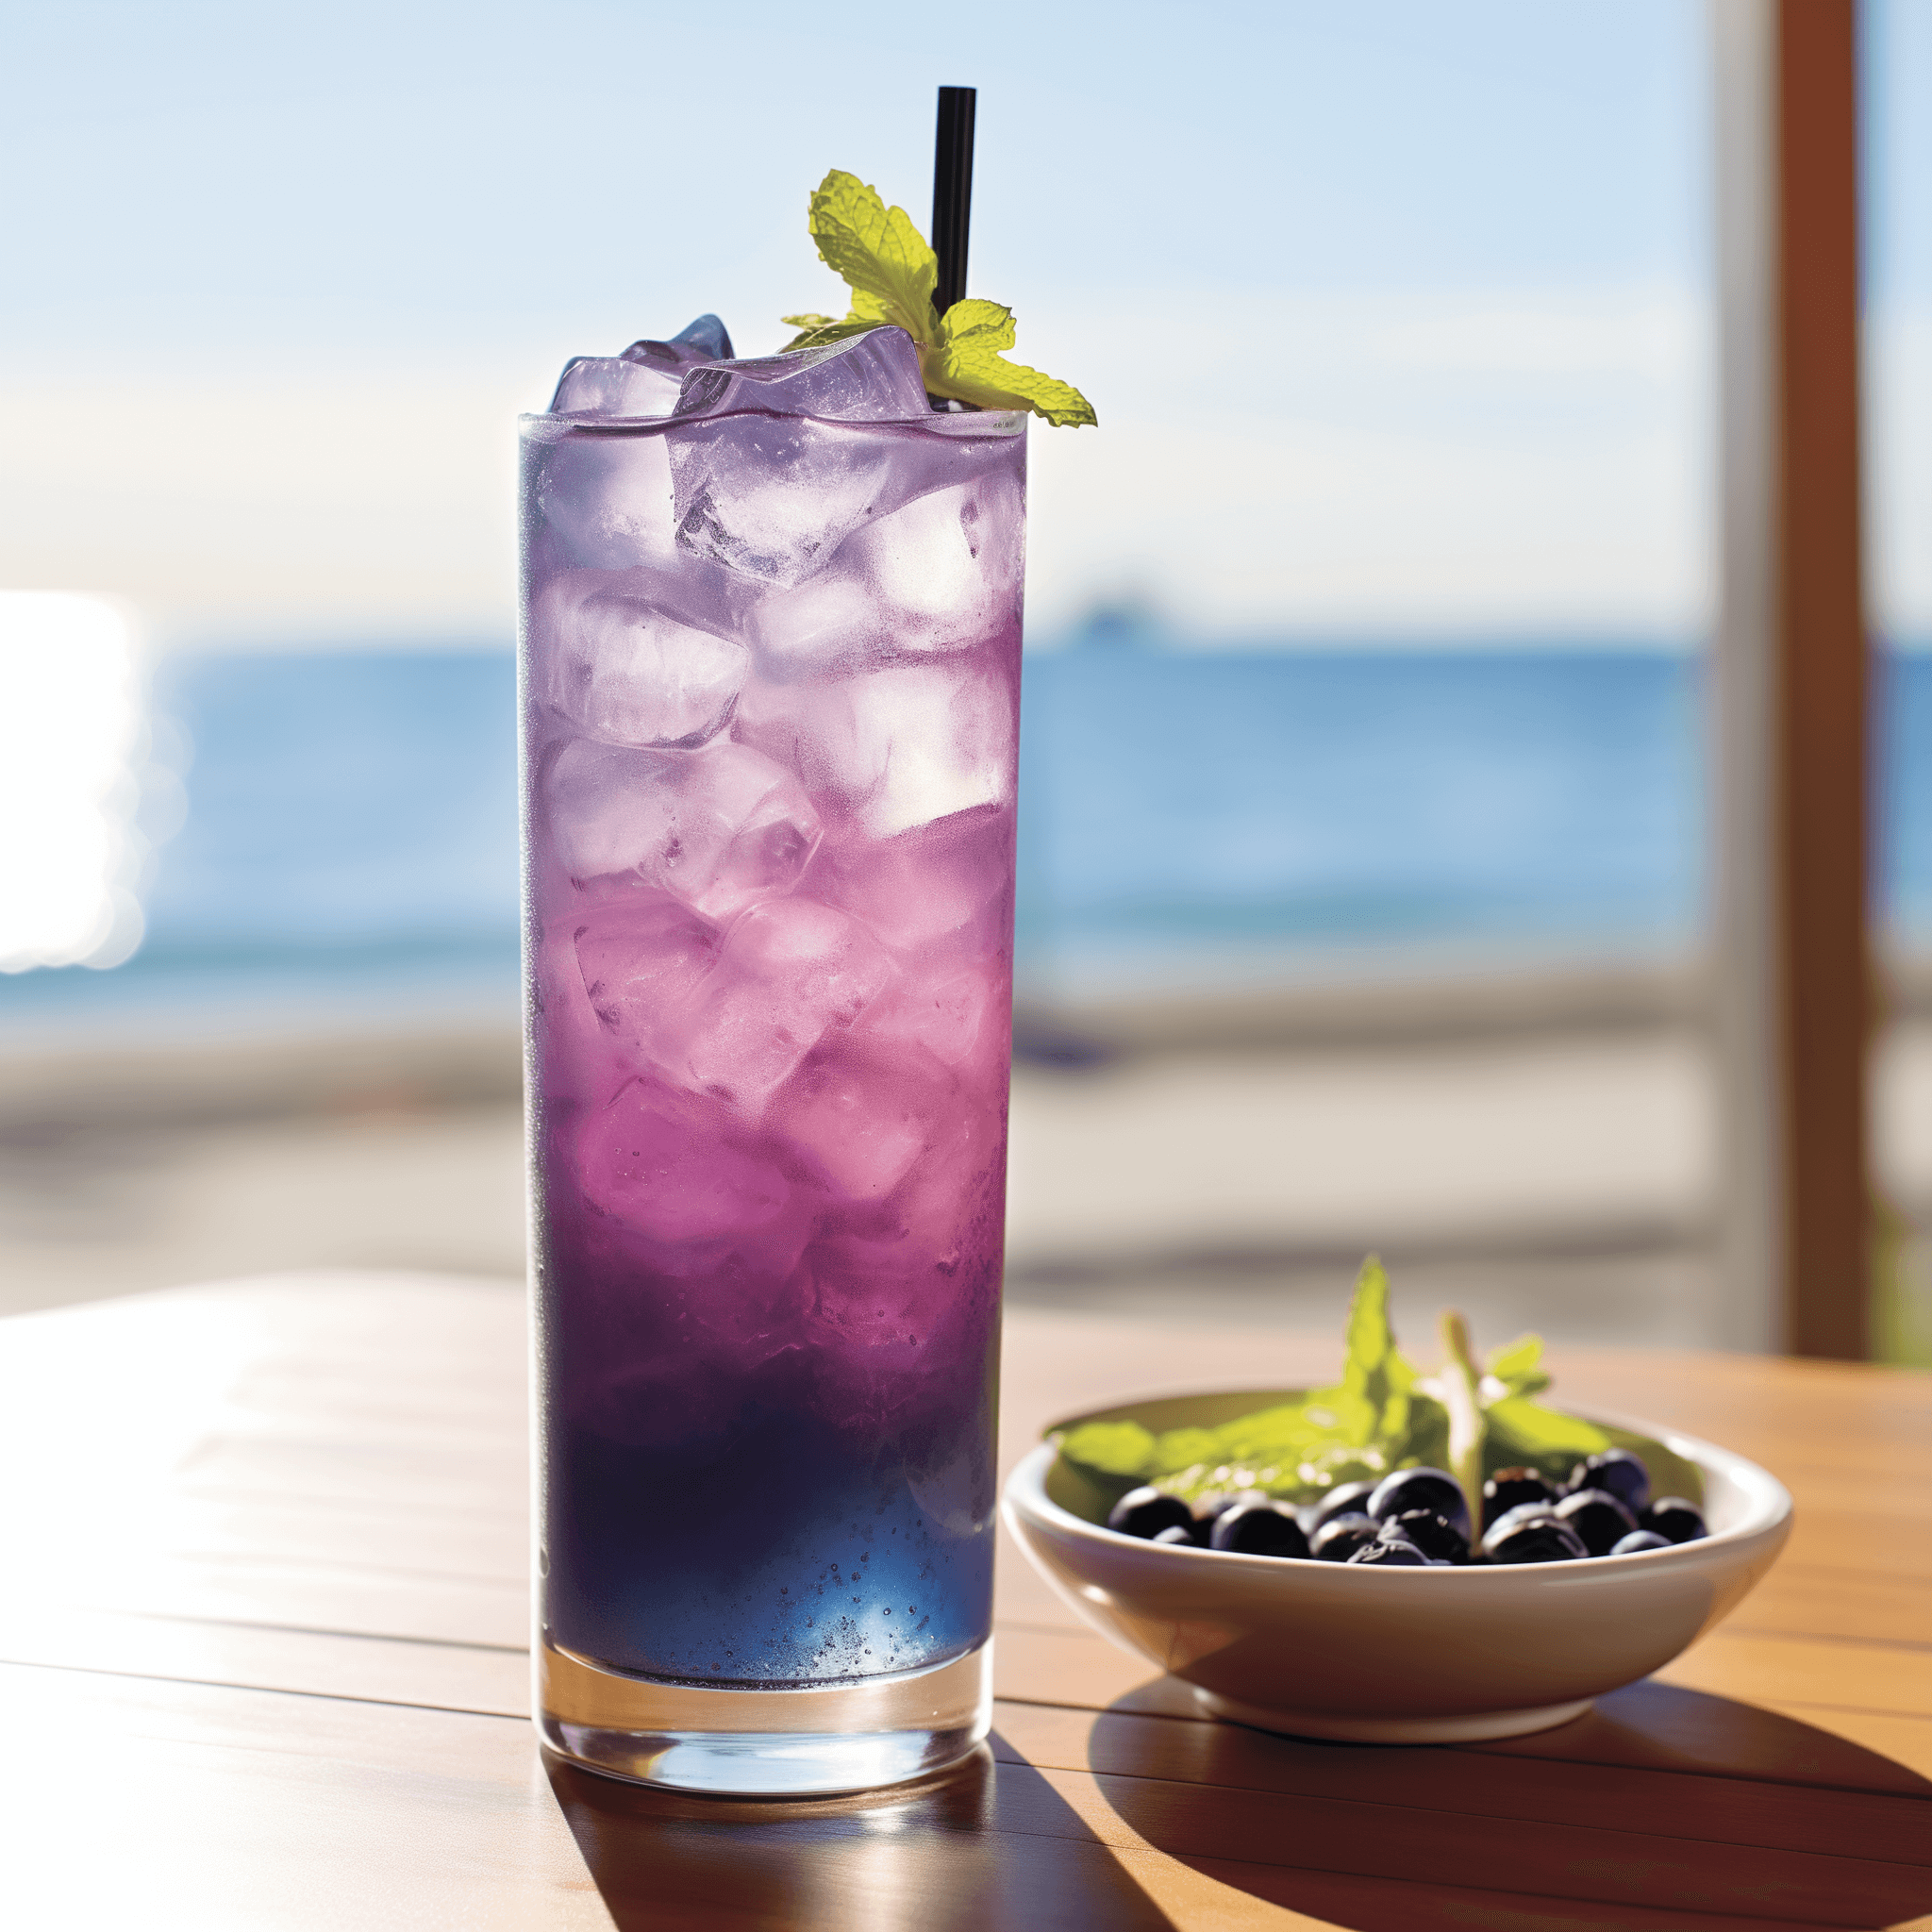 The Blueberry Tequila Smash is a harmonious blend of sweet and tart with a tequila kick. The muddled blueberries provide a fresh and fruity base, while the mint adds a cool, refreshing undertone. The agave syrup rounds out the sweetness, and the lime juice brings a zesty tang.